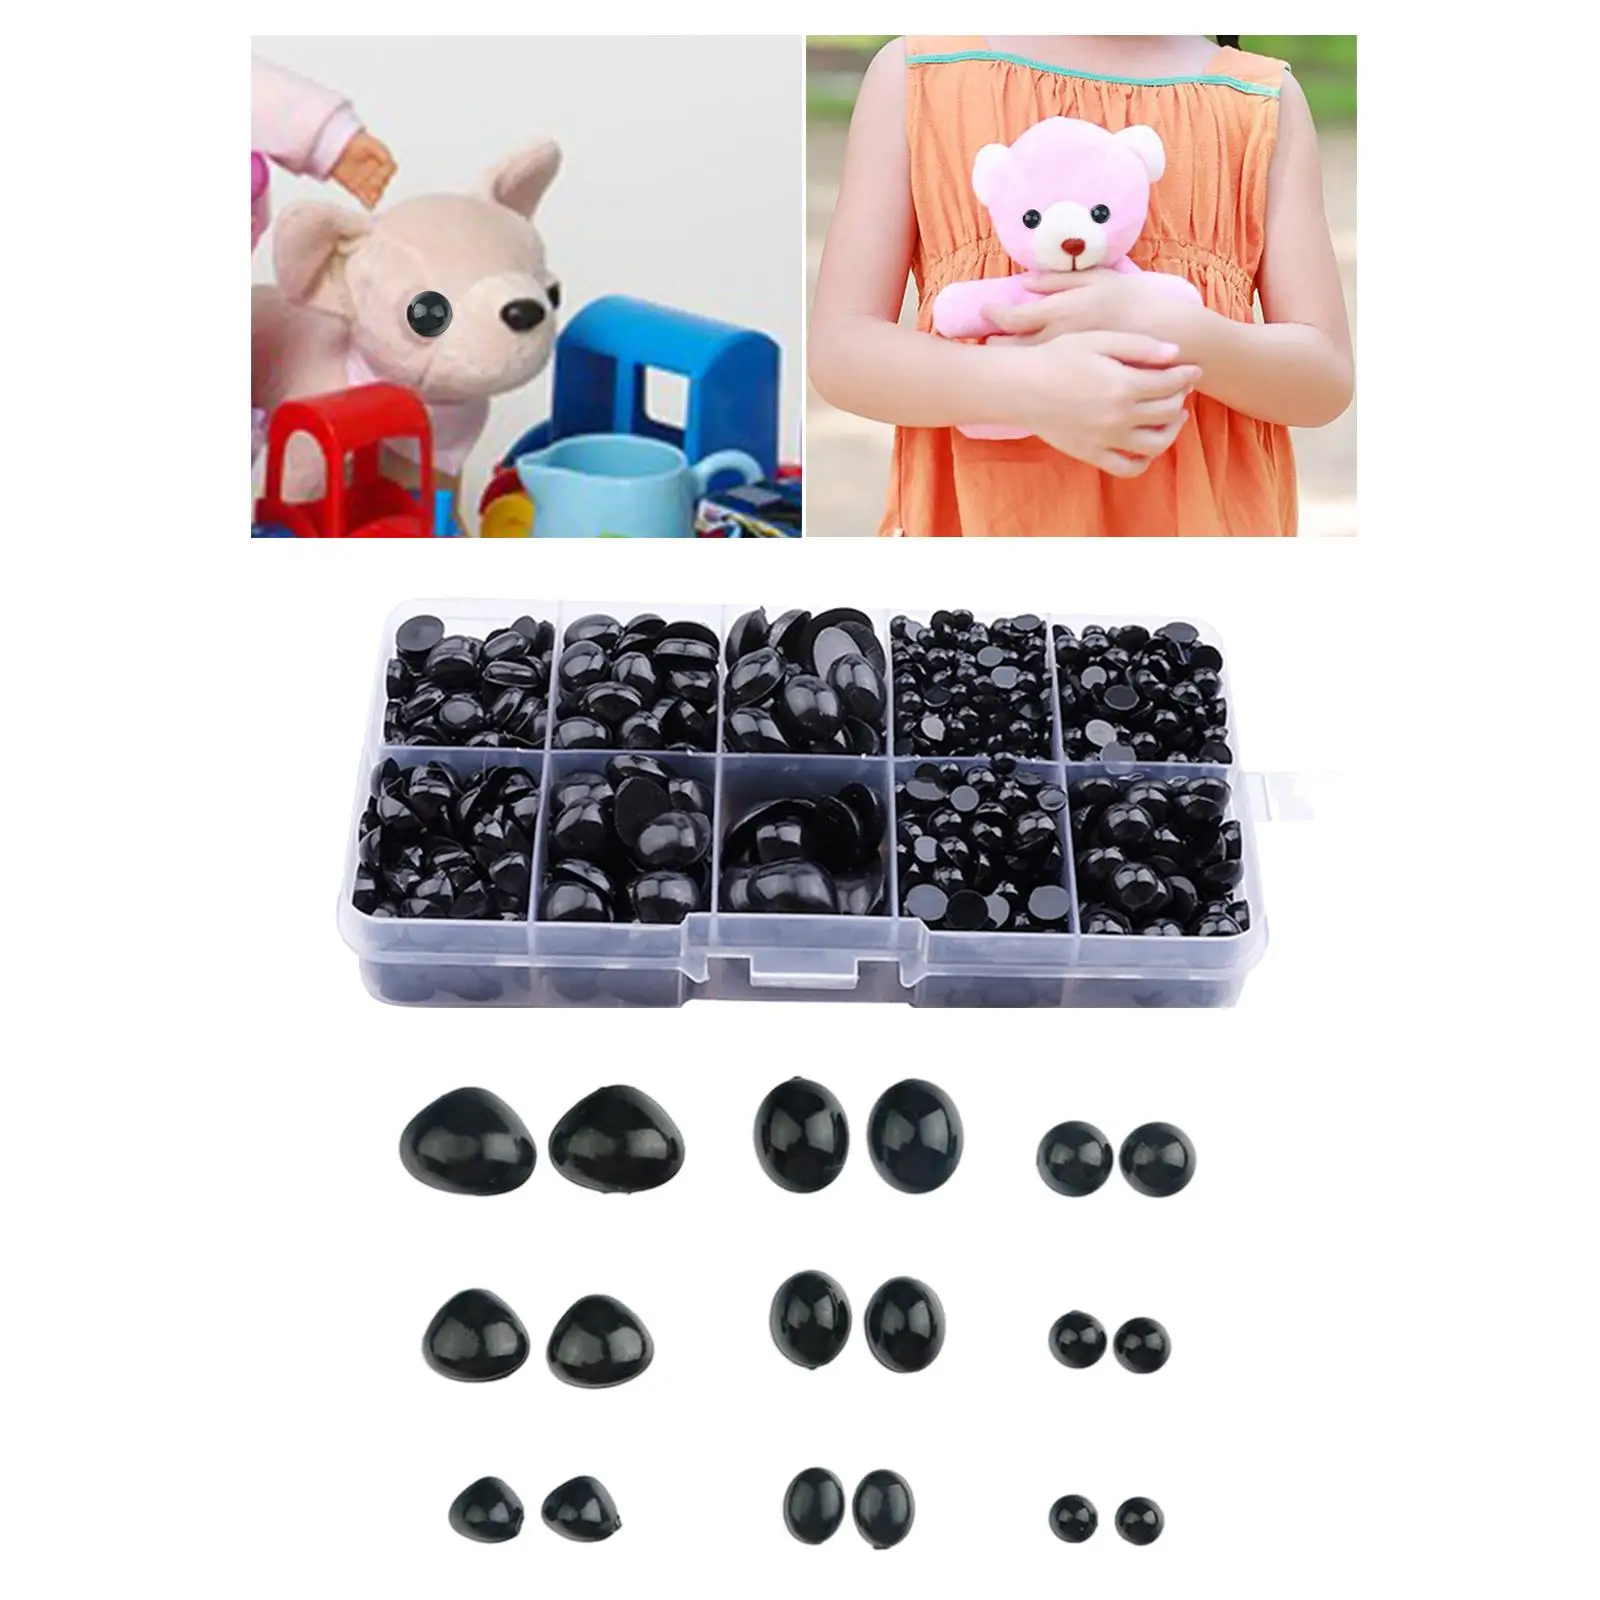 1000Pcs Plastic Safety Eyes and Noses DIY Crafts Sewing Supplies Scrapbook